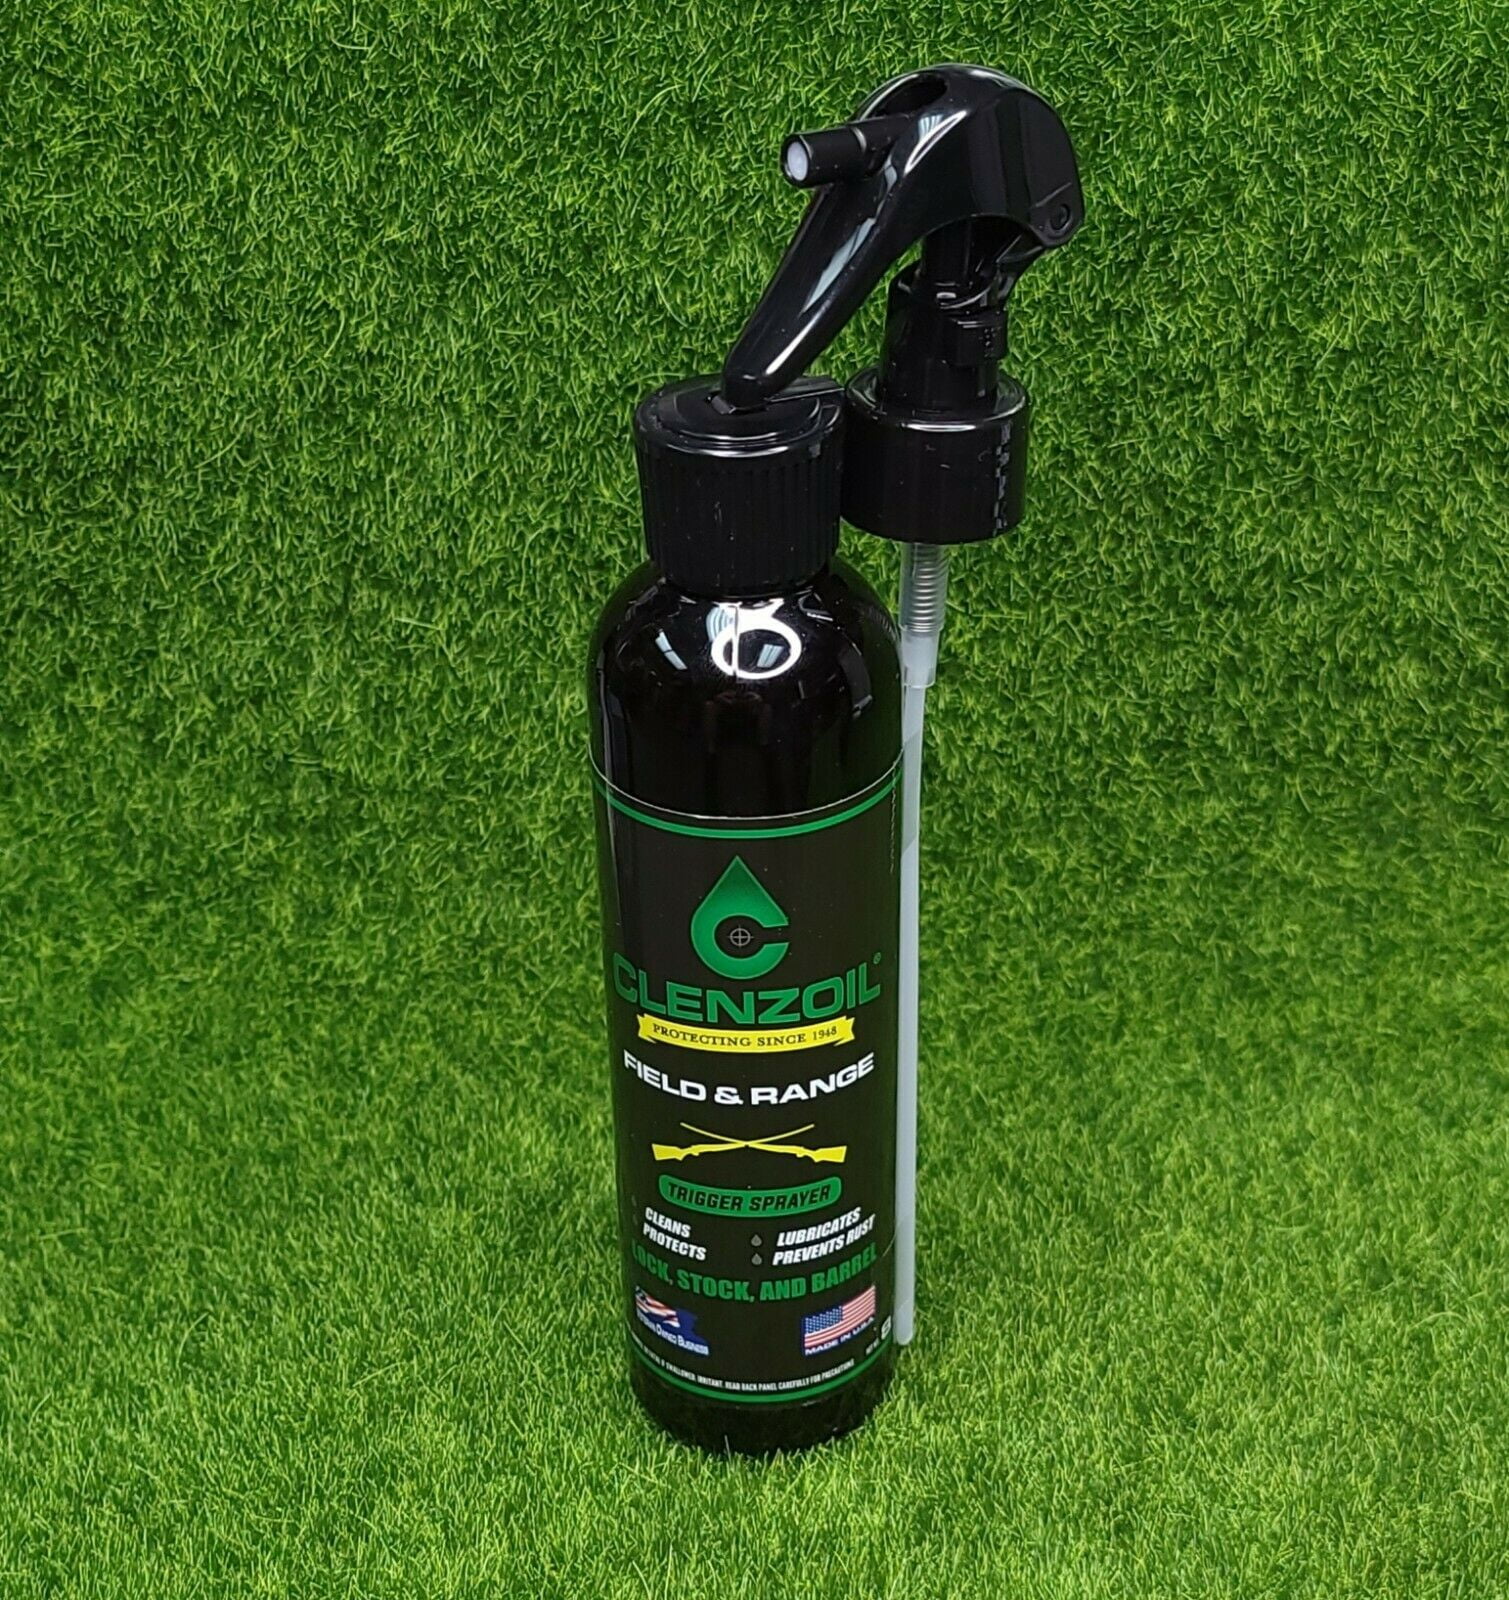 Clenzoil Field & Range Gun Oil Spray Lube, Cleaner Lubricant Protectant  CLP, Multi-Purpose Gun Cleaner and 3 in 1 Oil Lubricant